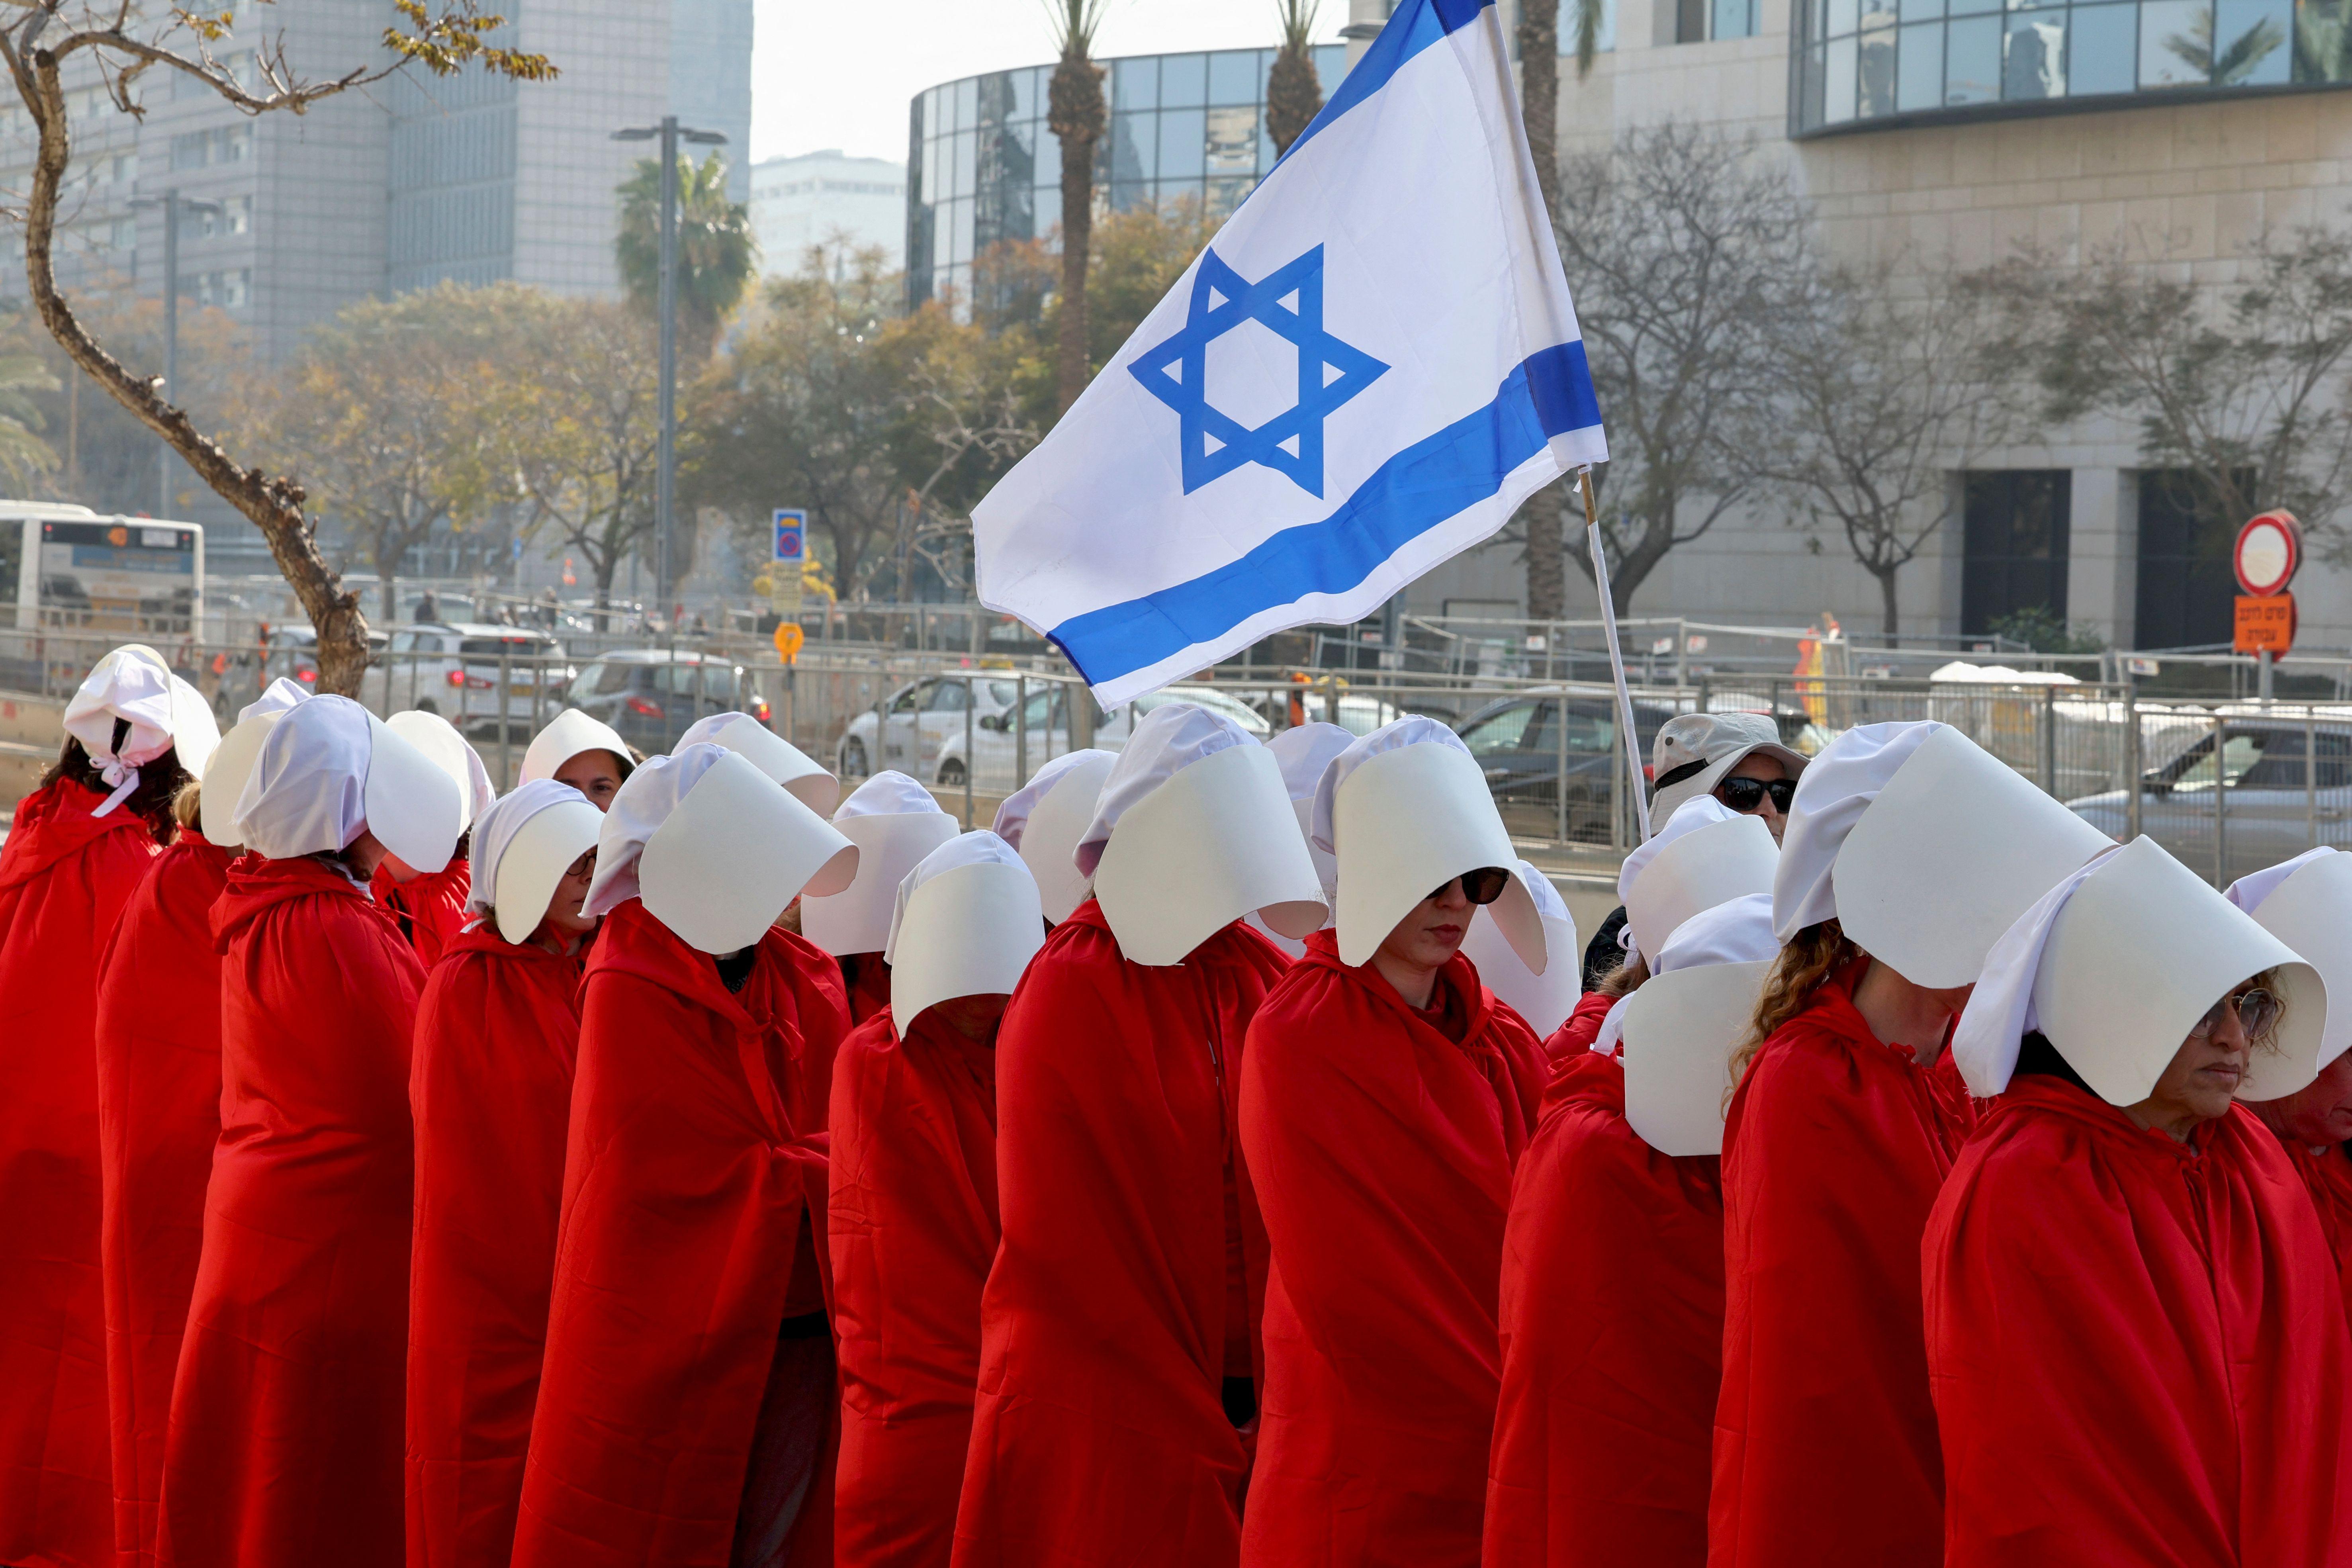 Israeli protests How women have found an effective path forward, as handmaids. photo